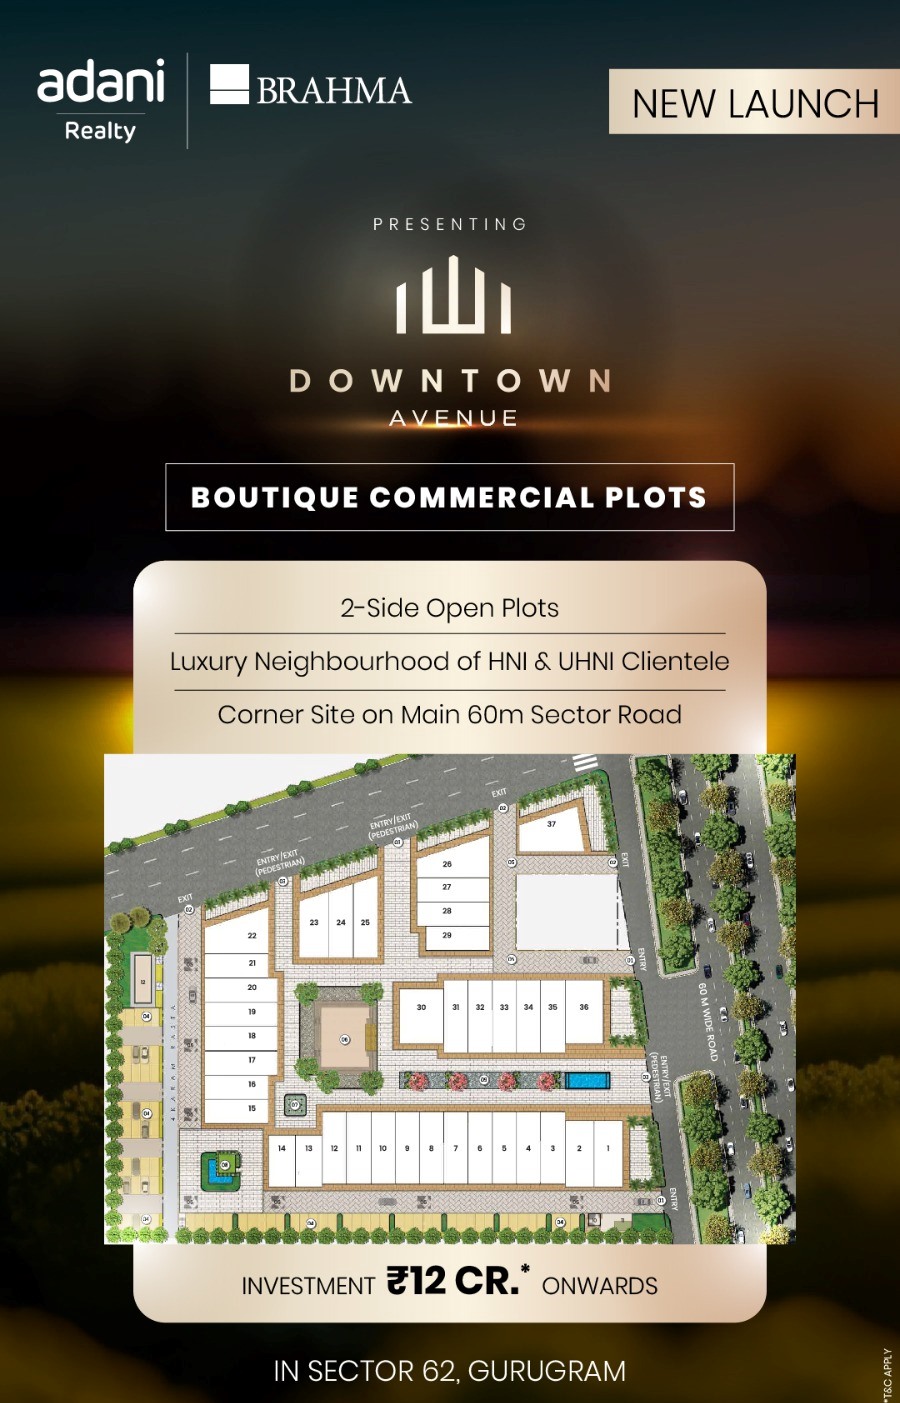 Boutique commercial plots at Adani Downtown Avenue in Sector 62, Gurgaon